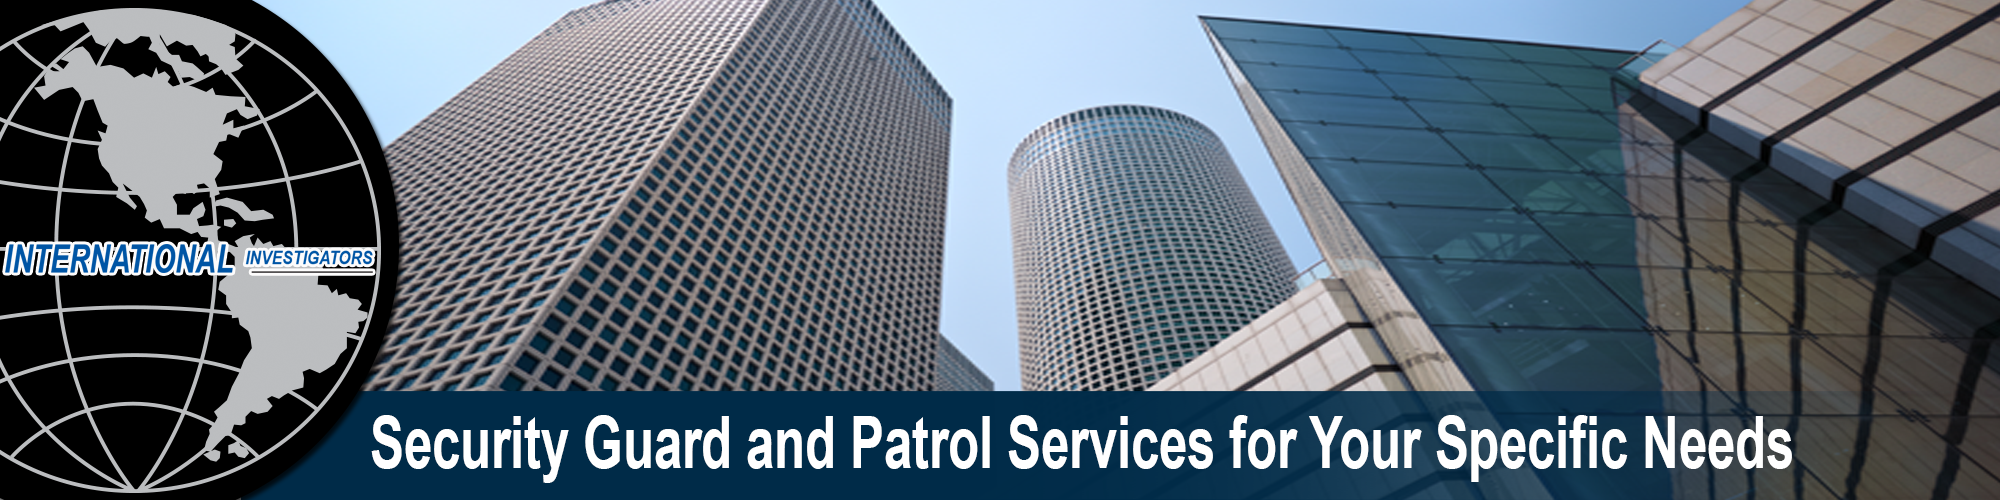 Security Guard and Patrol Services